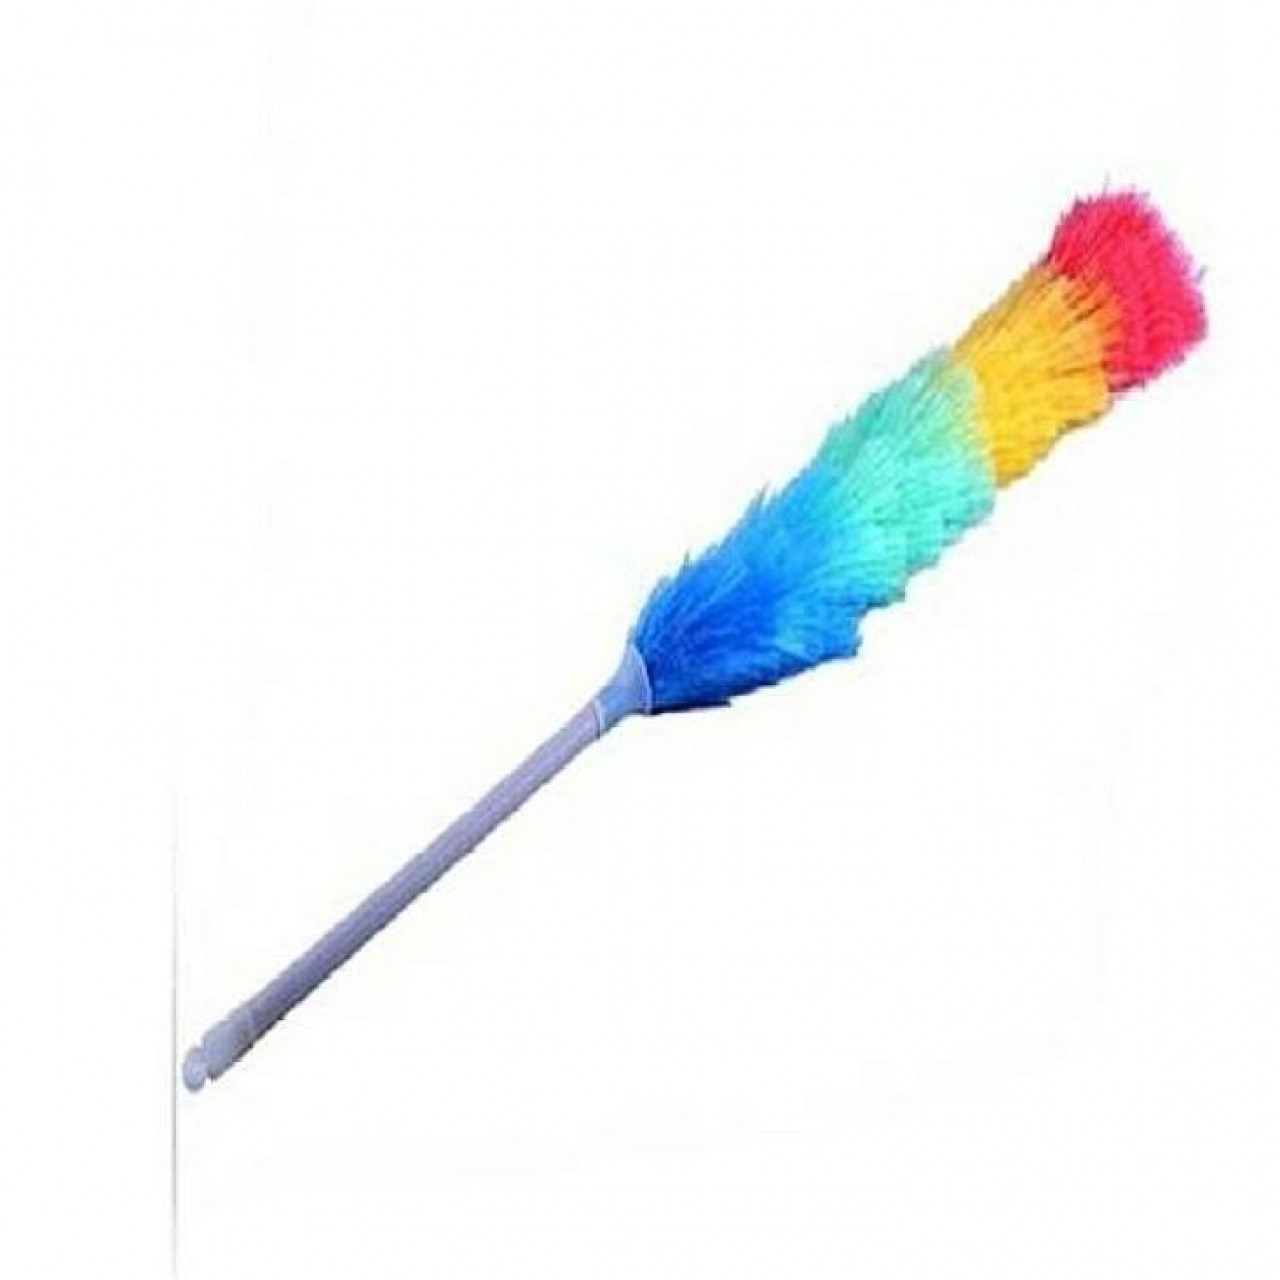 Large Feather Duster - Non-slip long handle - Multicolor - Lightweight